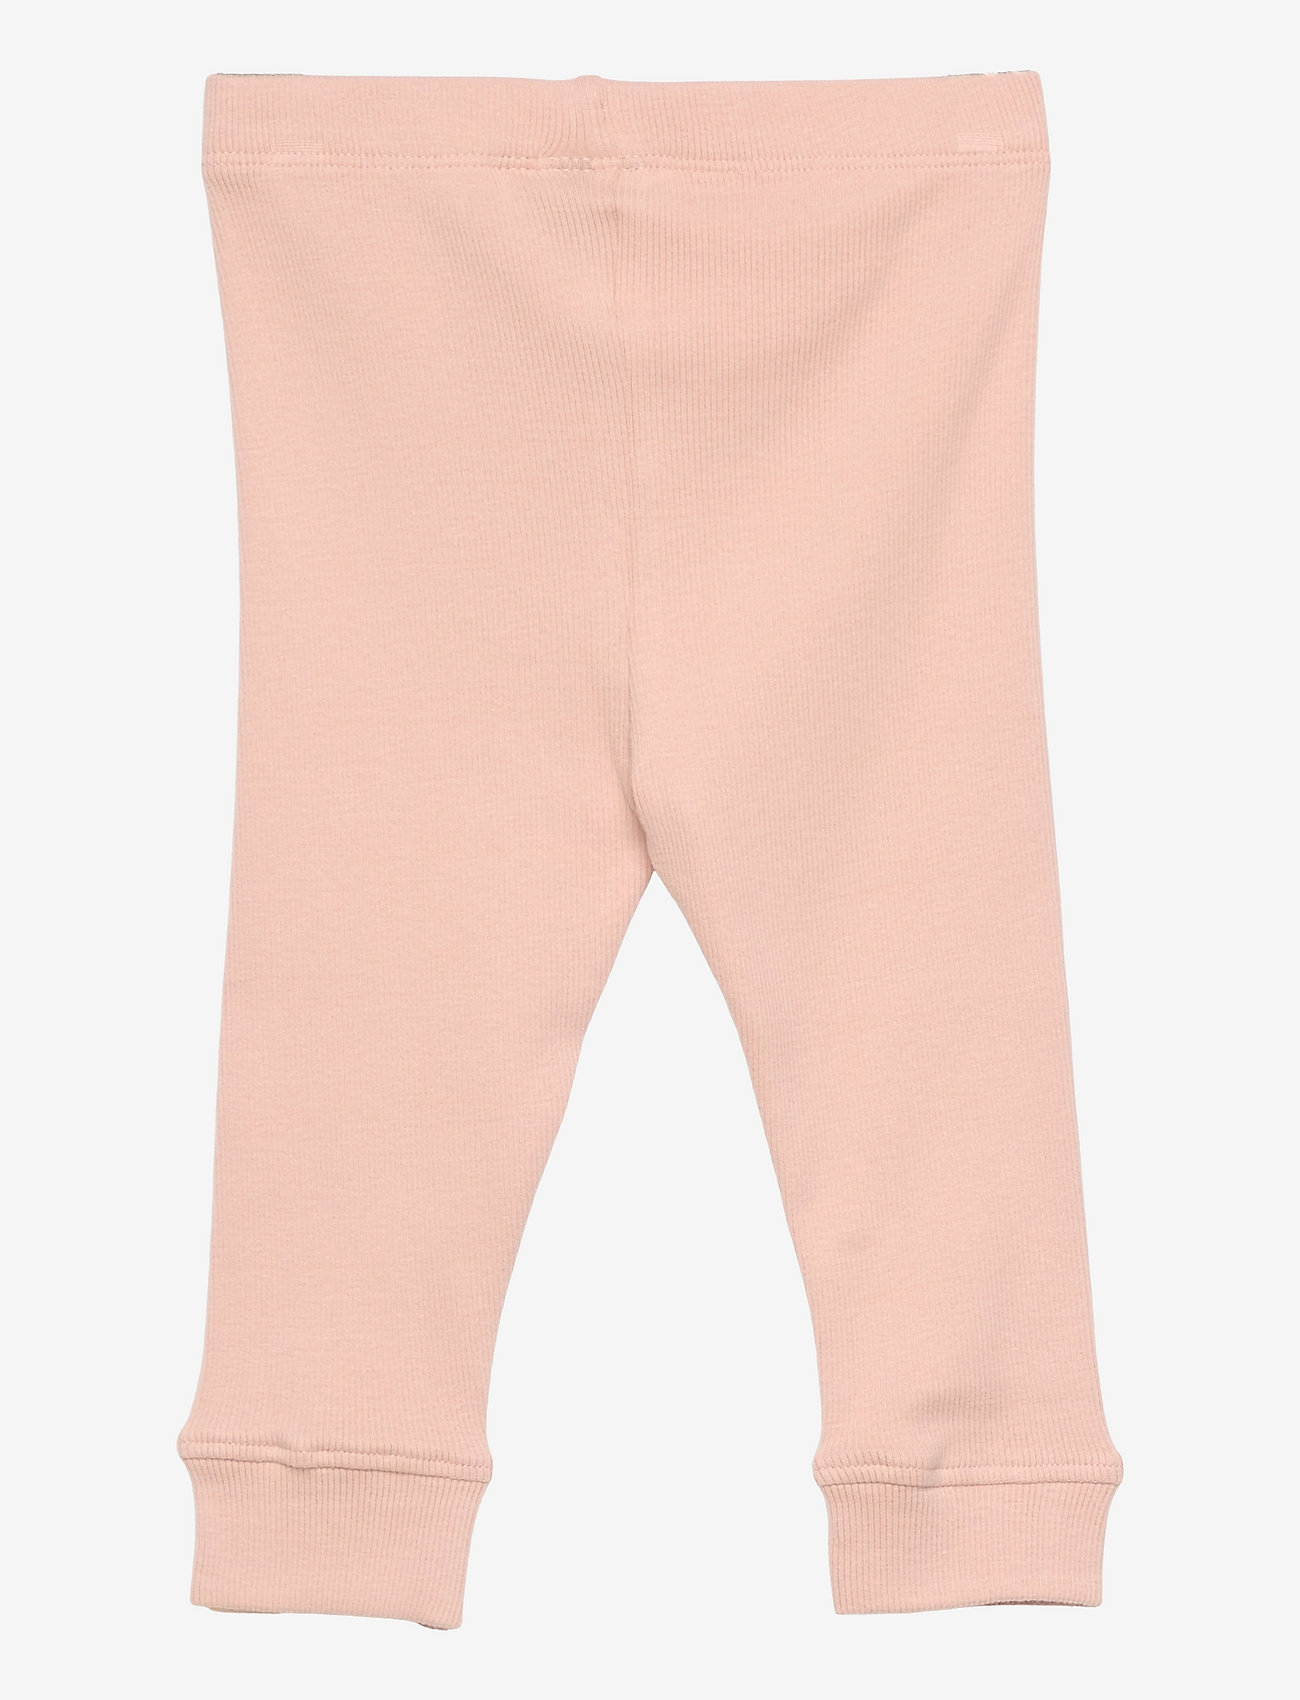 Sofie Schnoor Baby and Kids - Leggings - lowest prices - light rose - 1